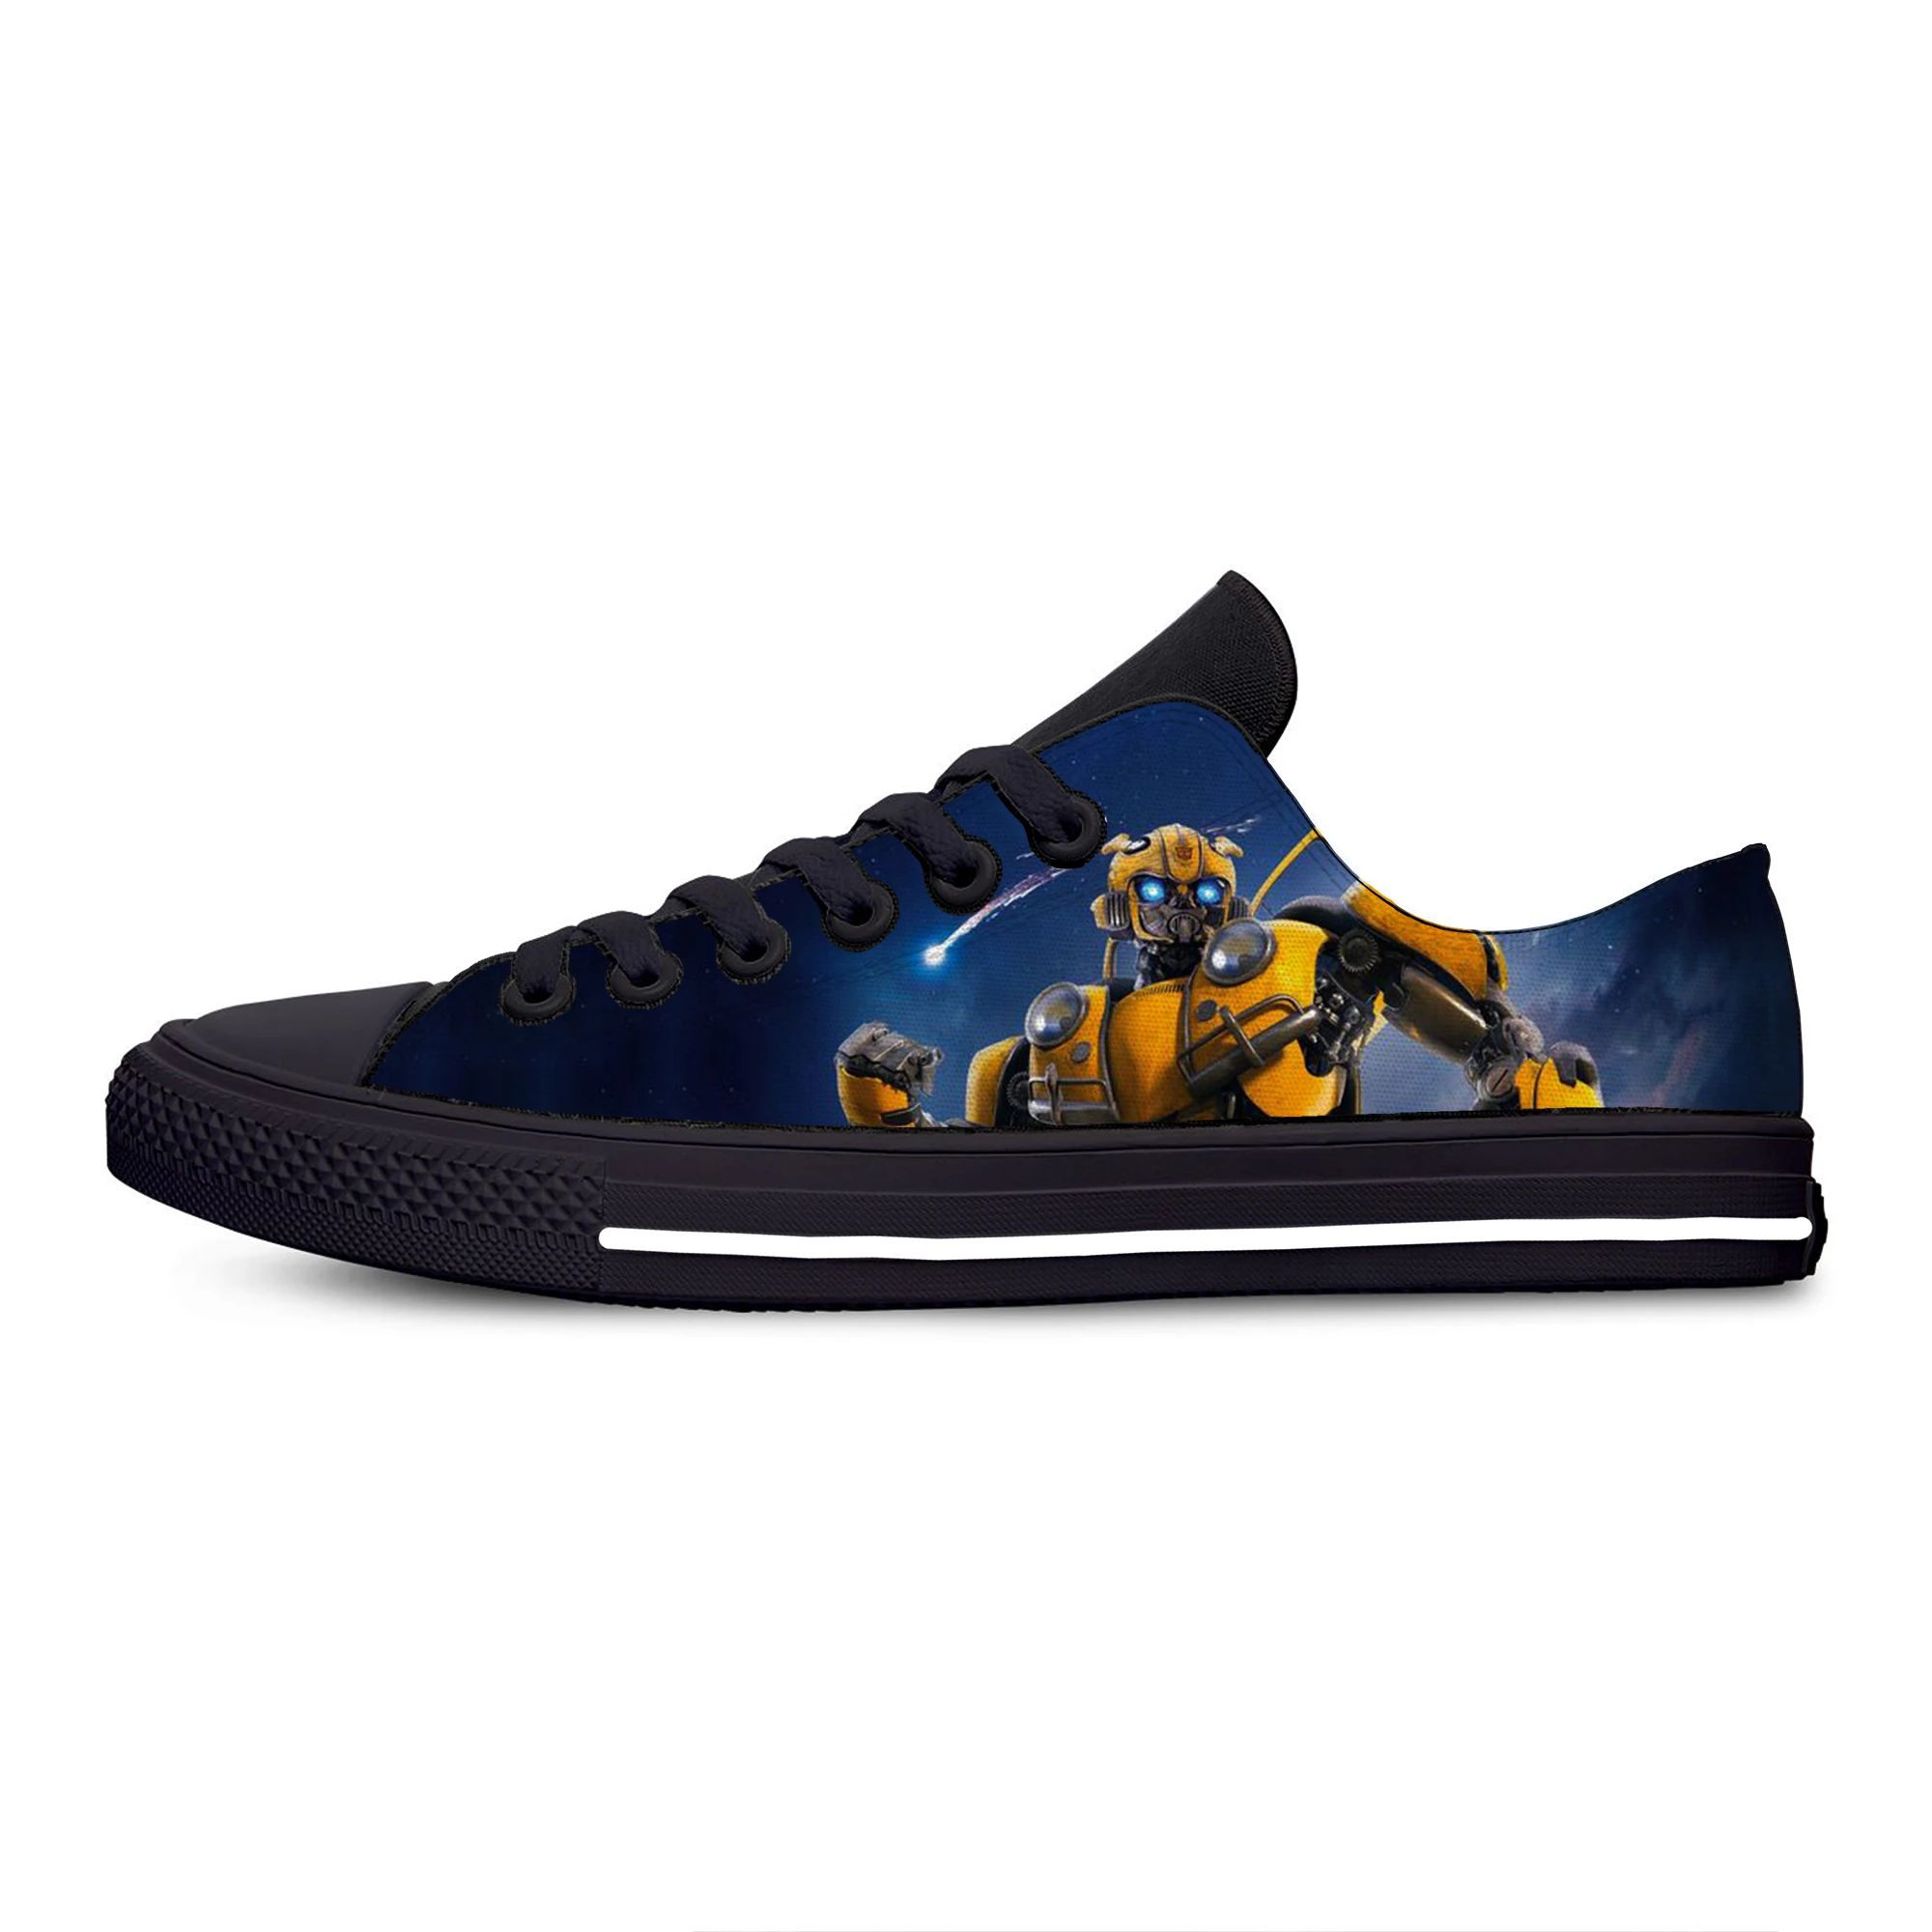 Couleur: Bumblebee19Shoe Taille: 12